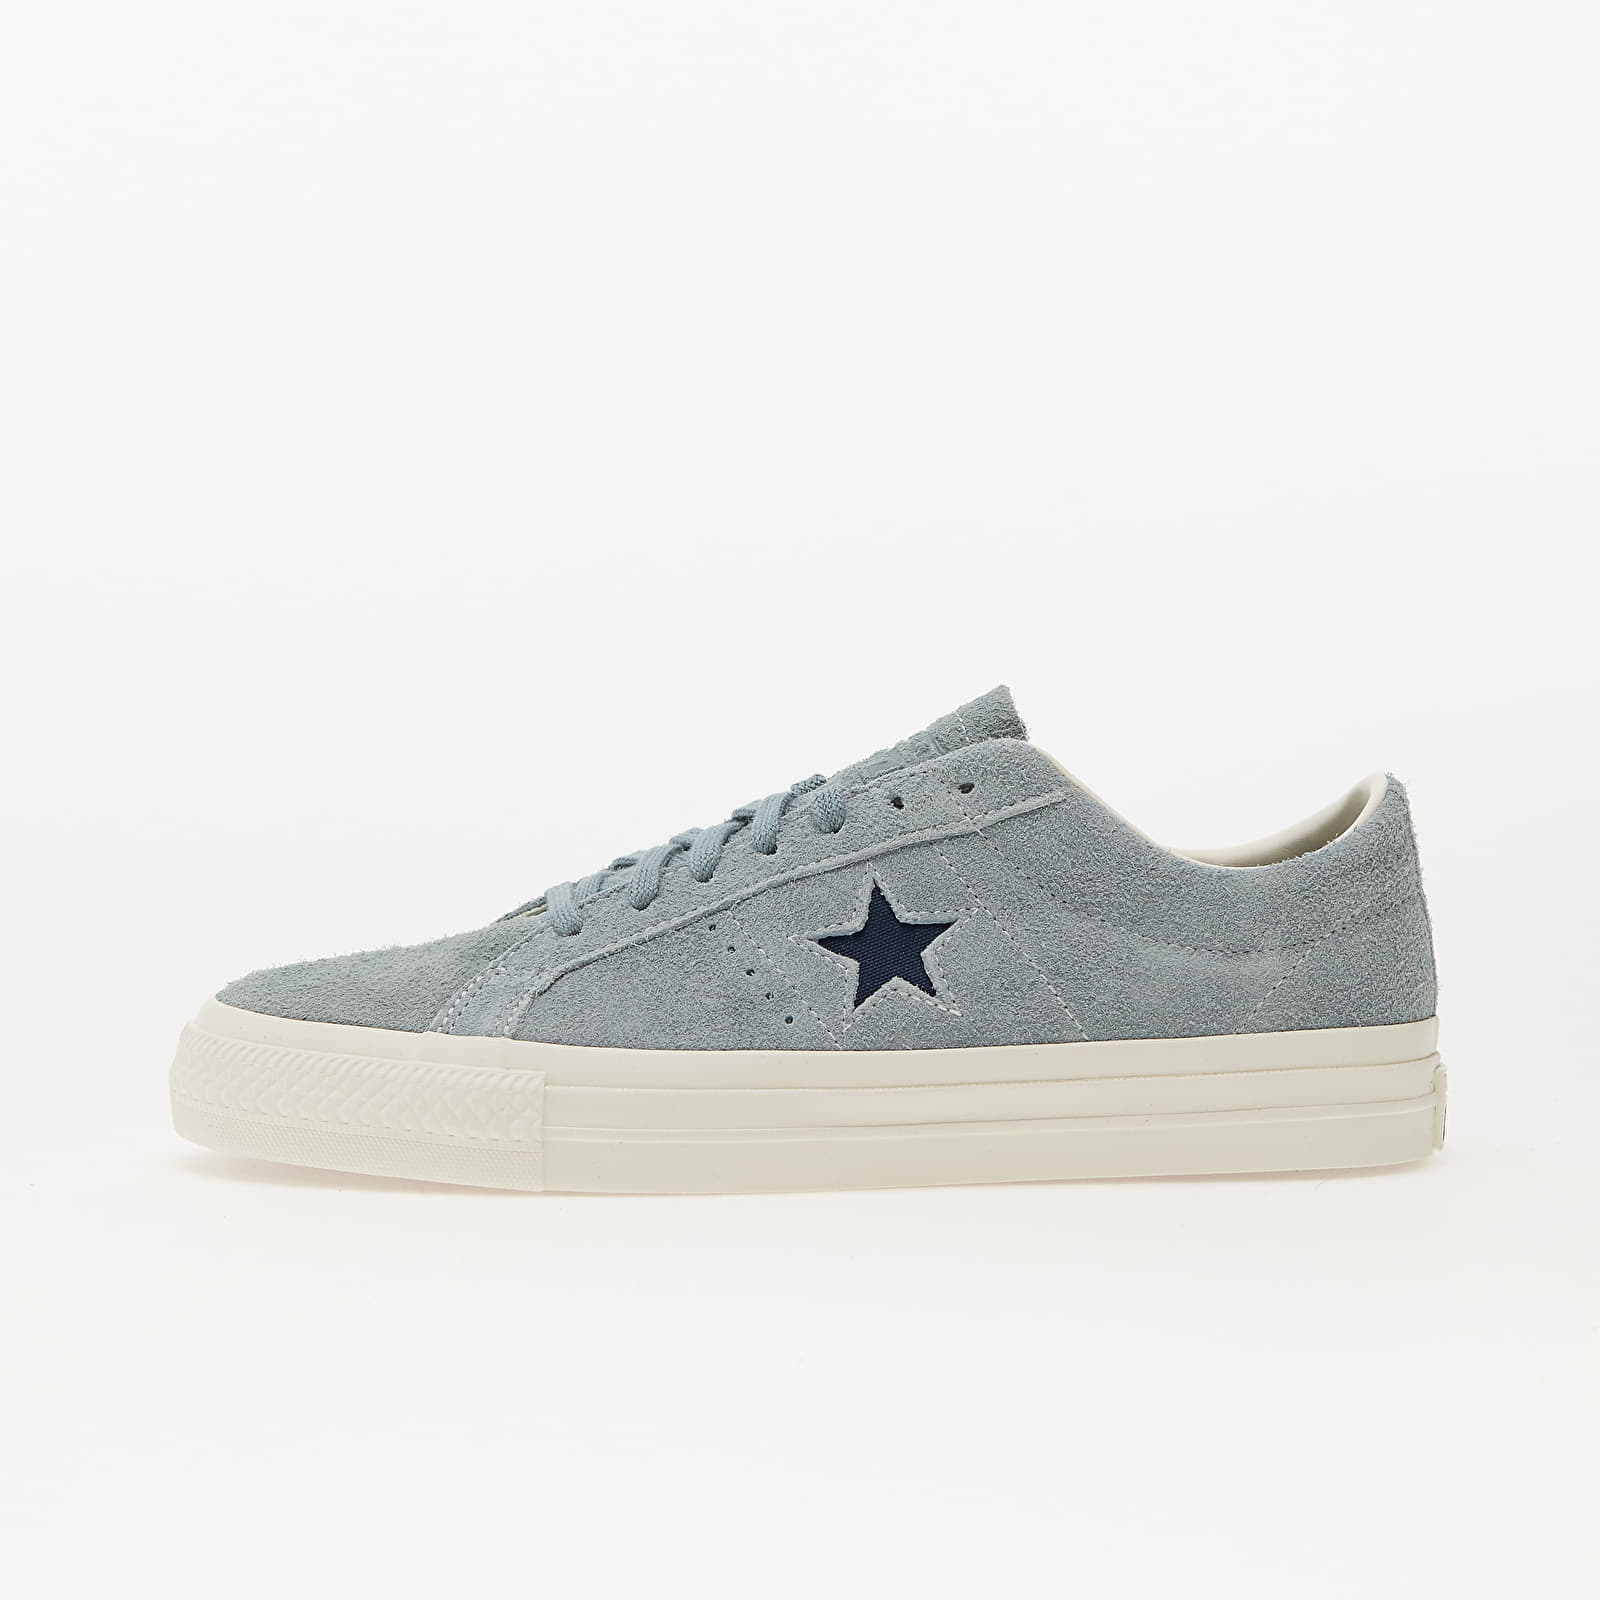 Men's shoes Converse One Star Pro Vintage Suede Tidepool Grey/ Navy/ Egret